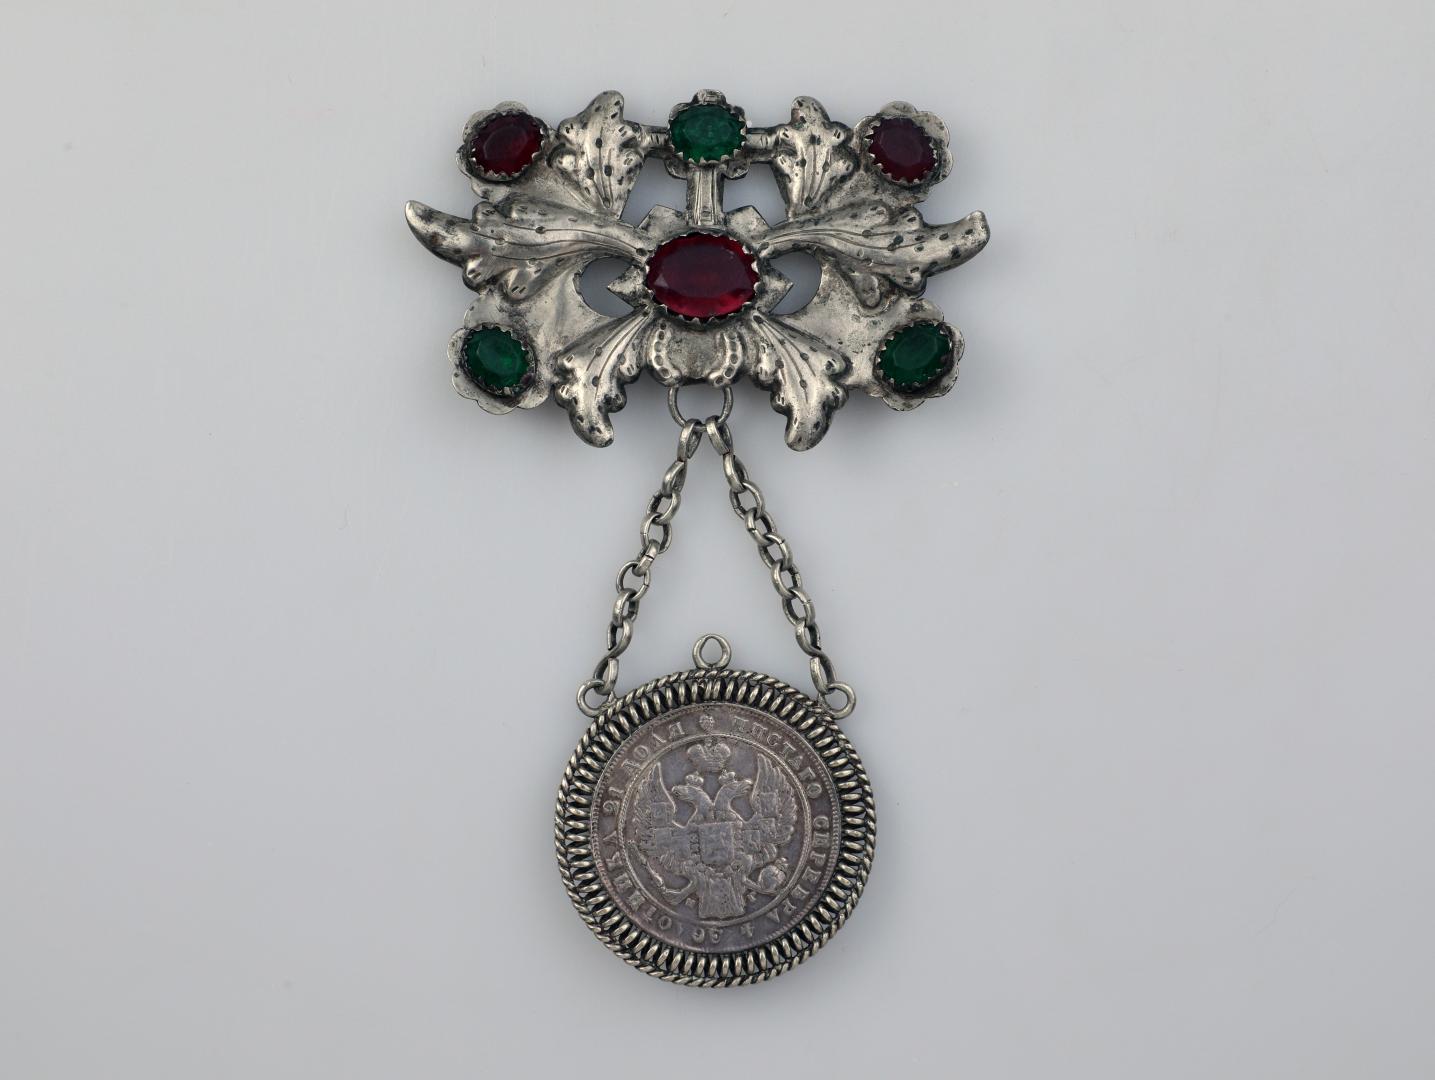 Large dukach (coin-shaped pendants) hung on a ribbon; worn as accessory